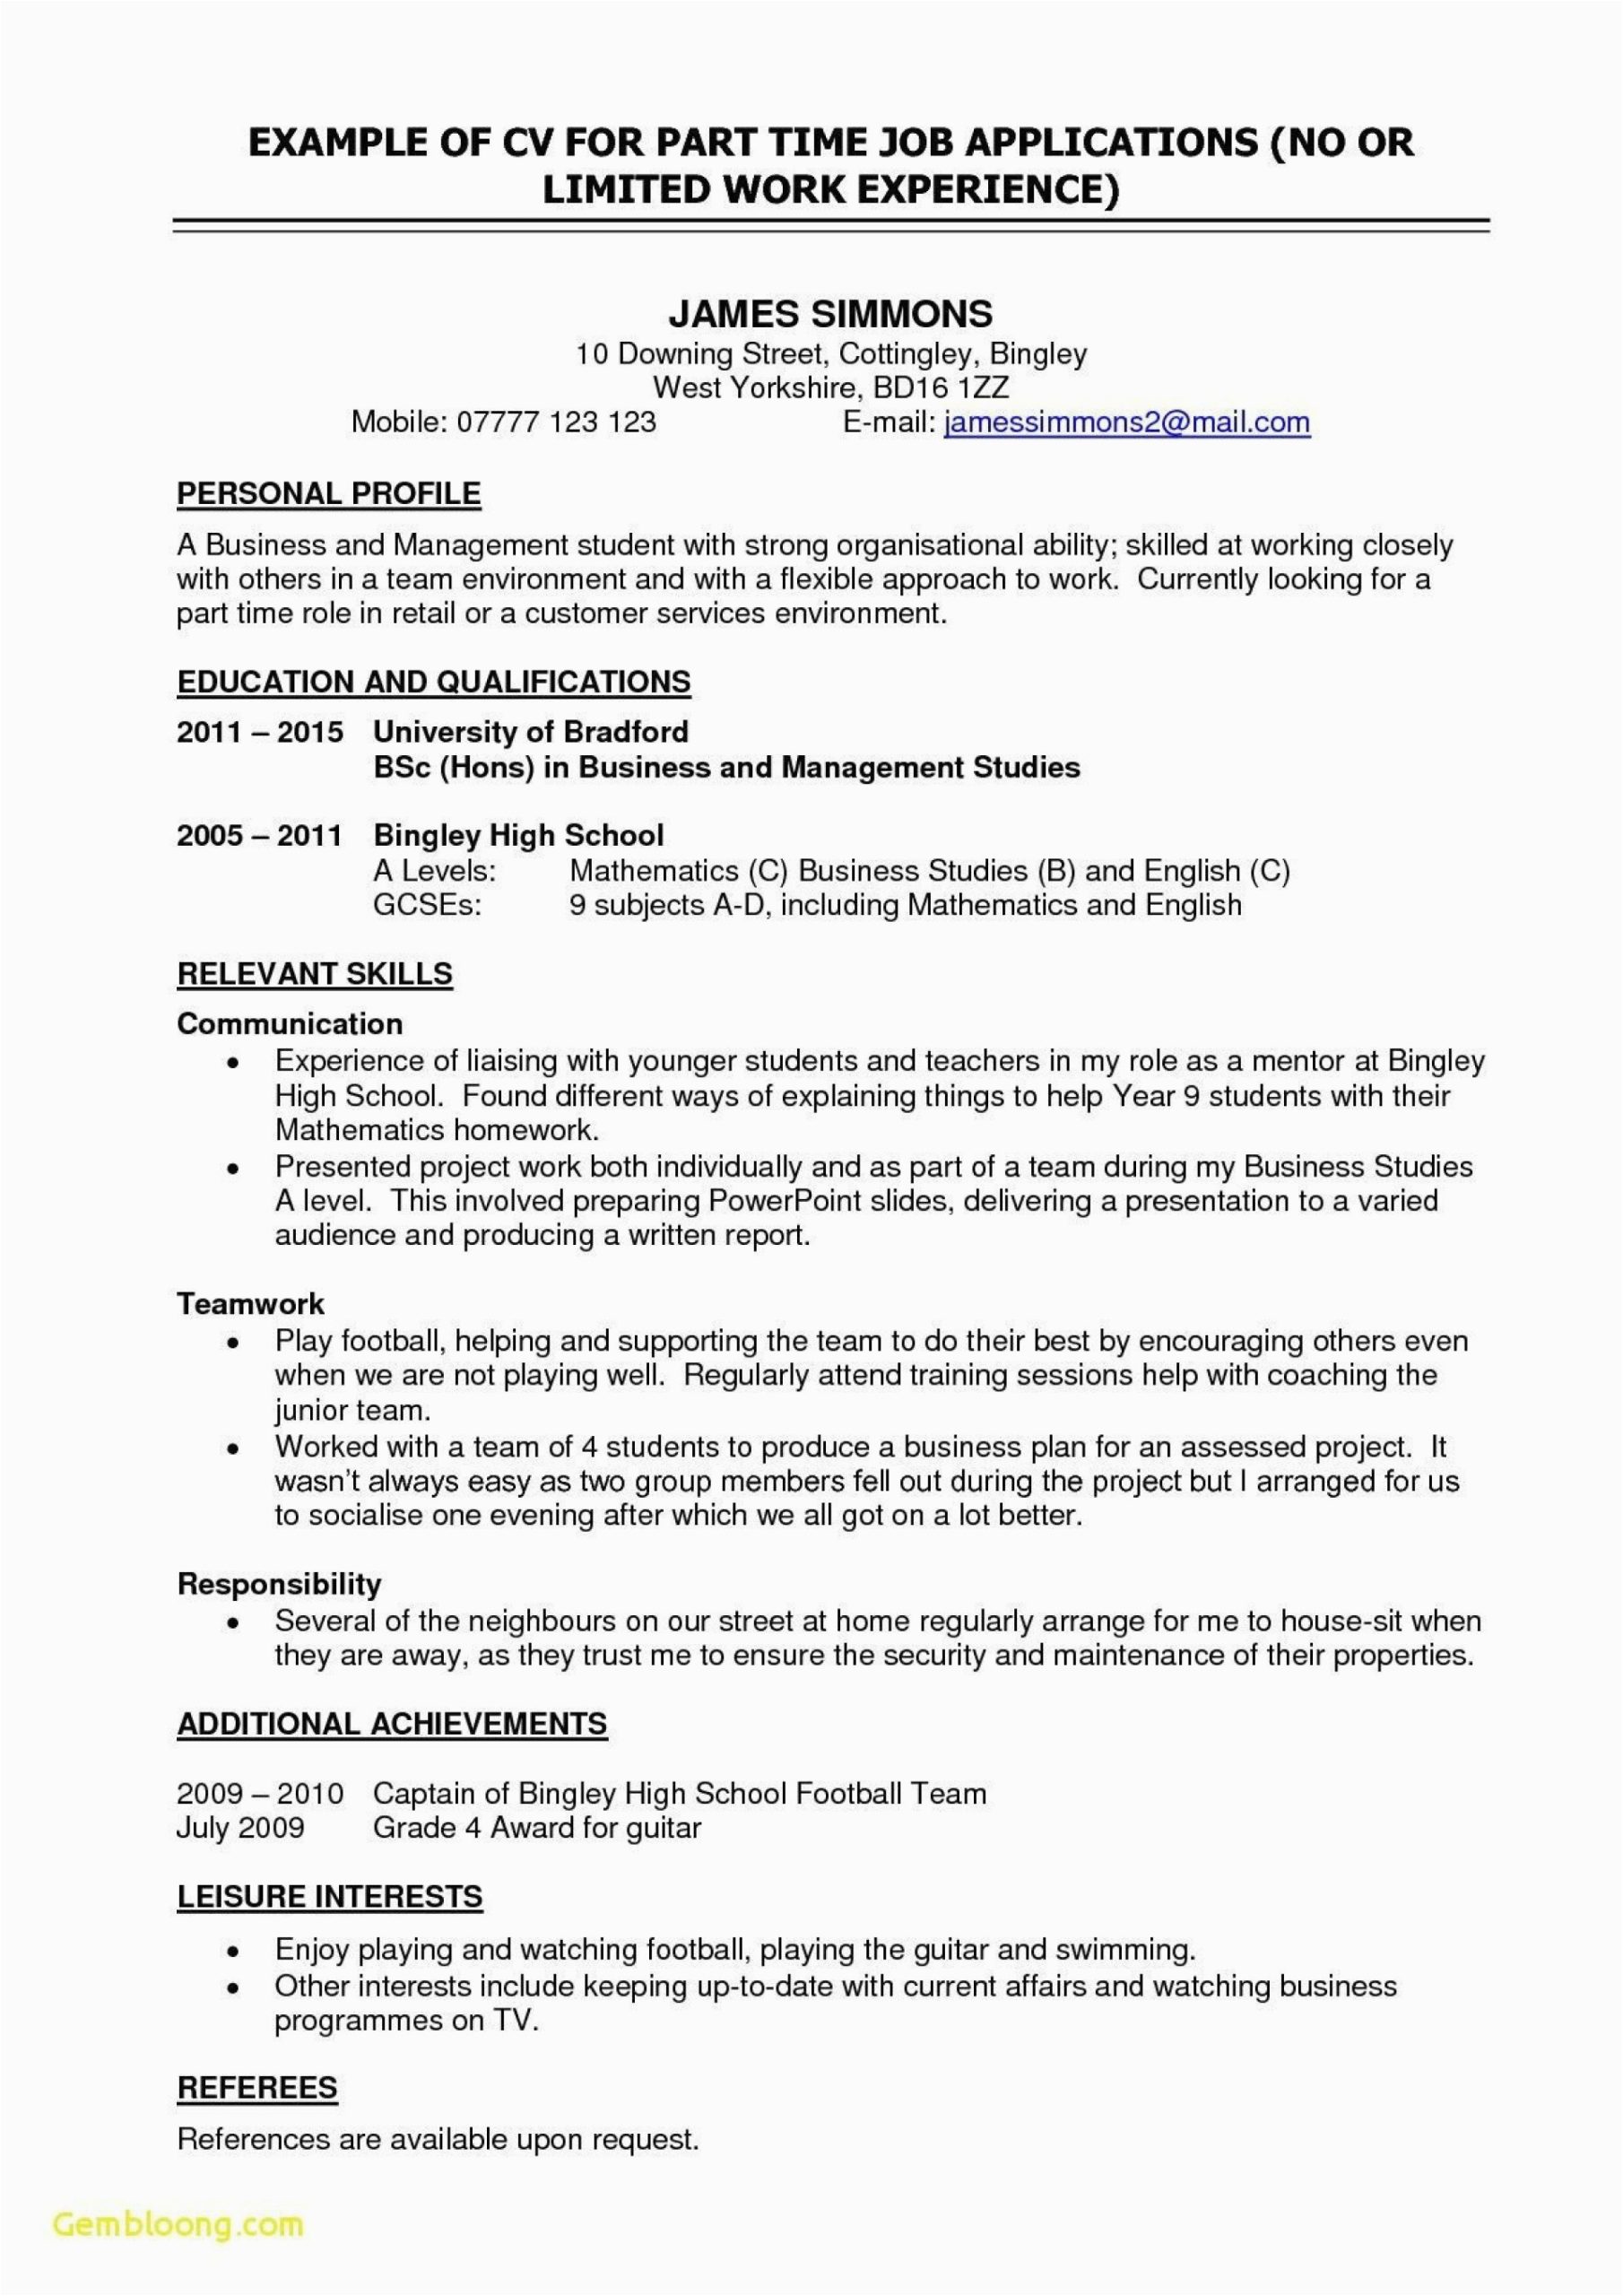 Student Resume Sample for Part Time Job Part Time Job Resume Template Addictionary